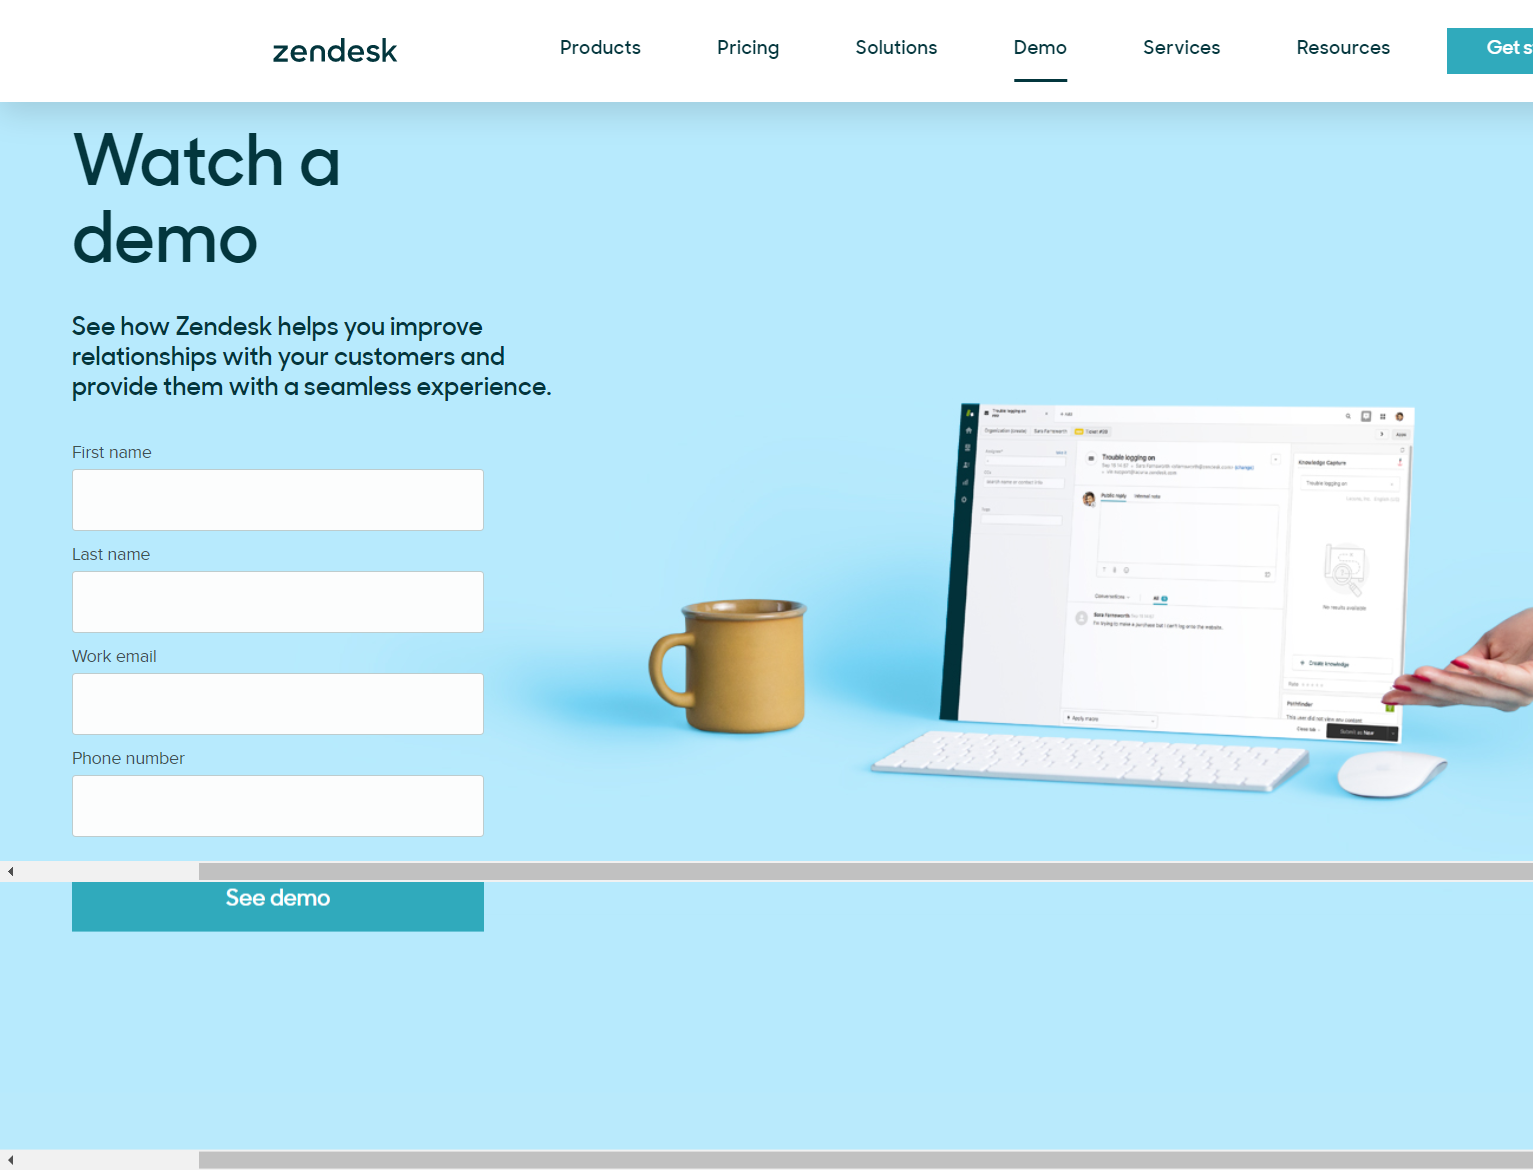 A high converting landing page keeps things simple, like this example from Zendesk